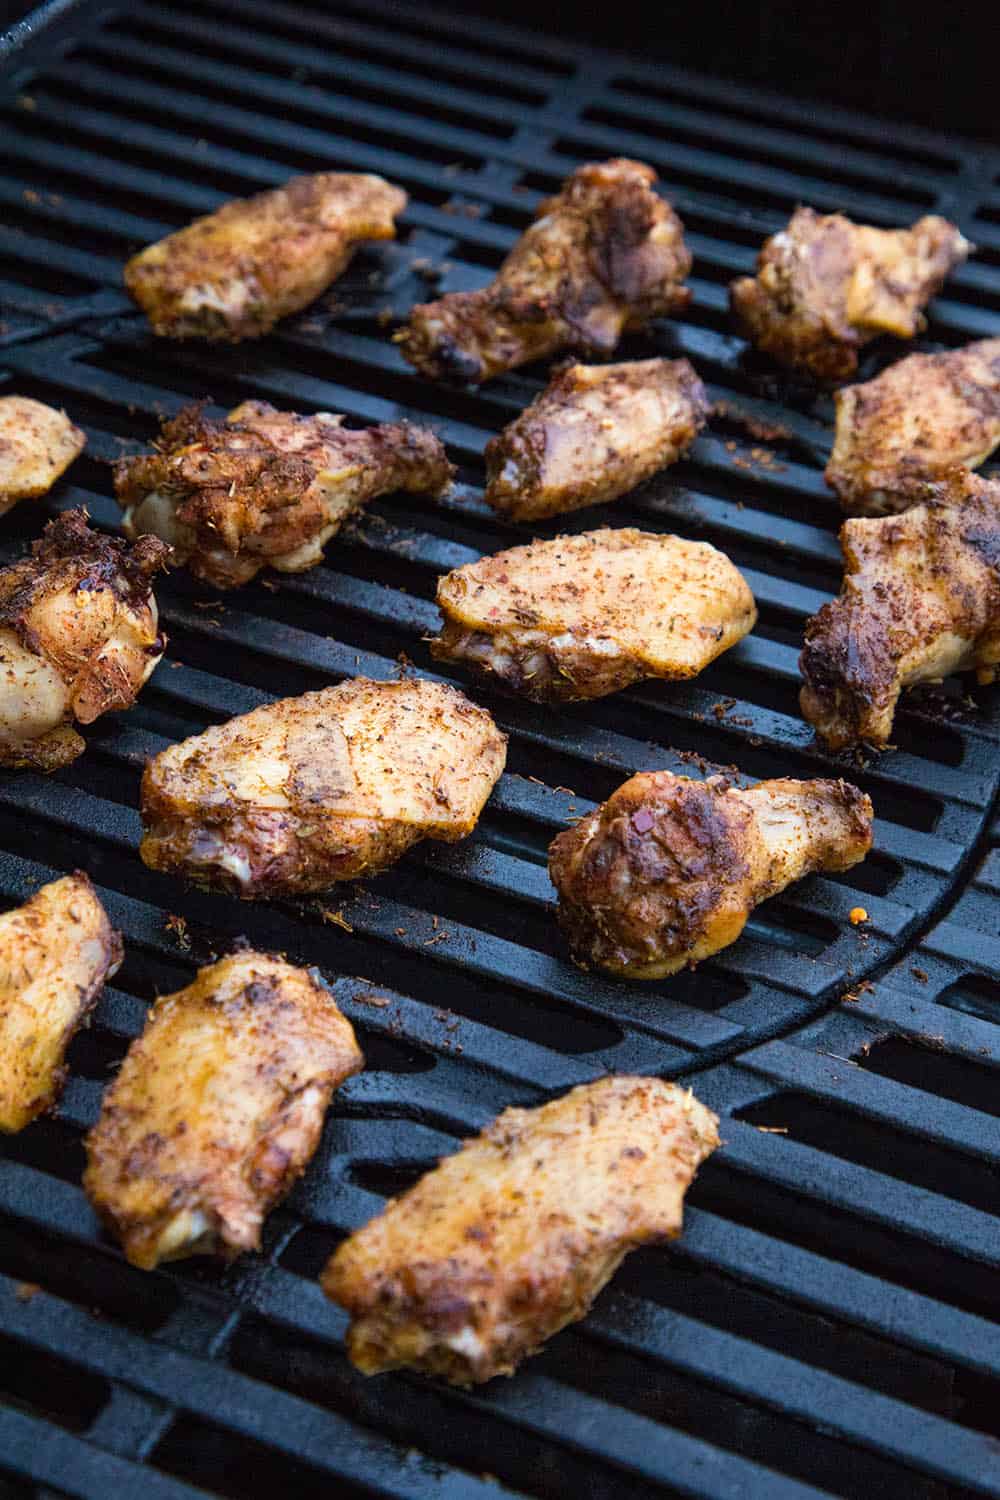 Grilled Jerk Chicken Wings on the grill